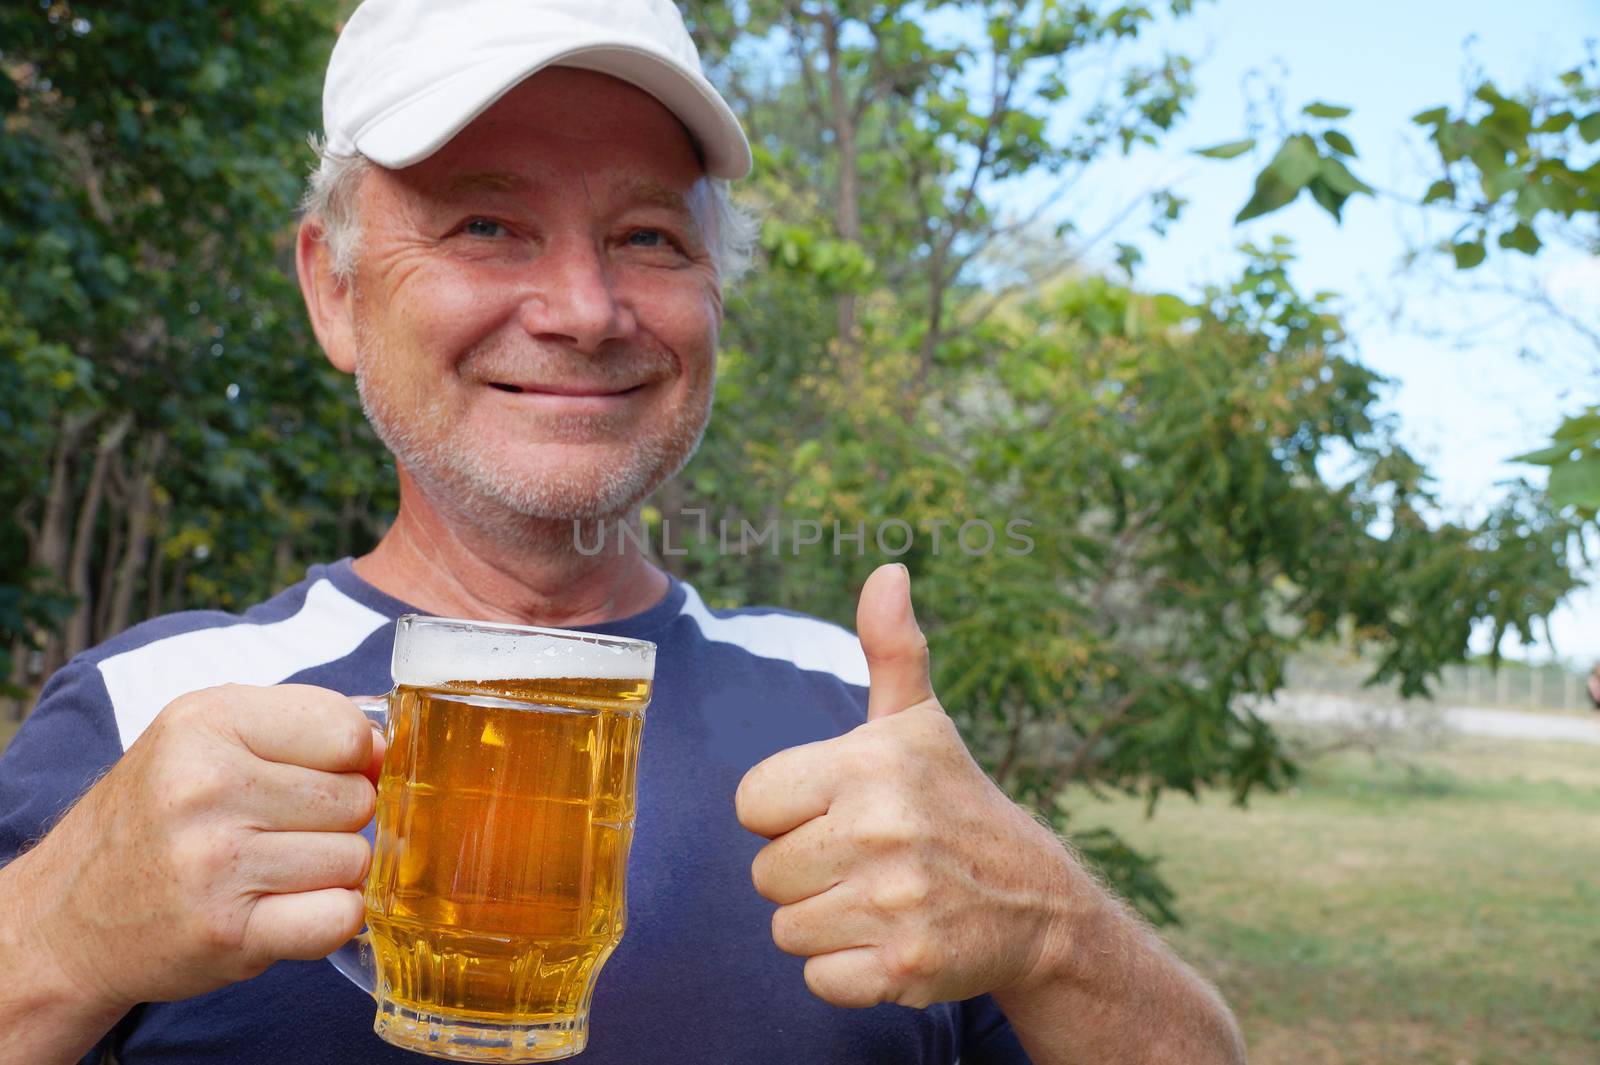 a smiling man holds a mug of beer in one hand, with the other hand shows that everything is fine by Annado